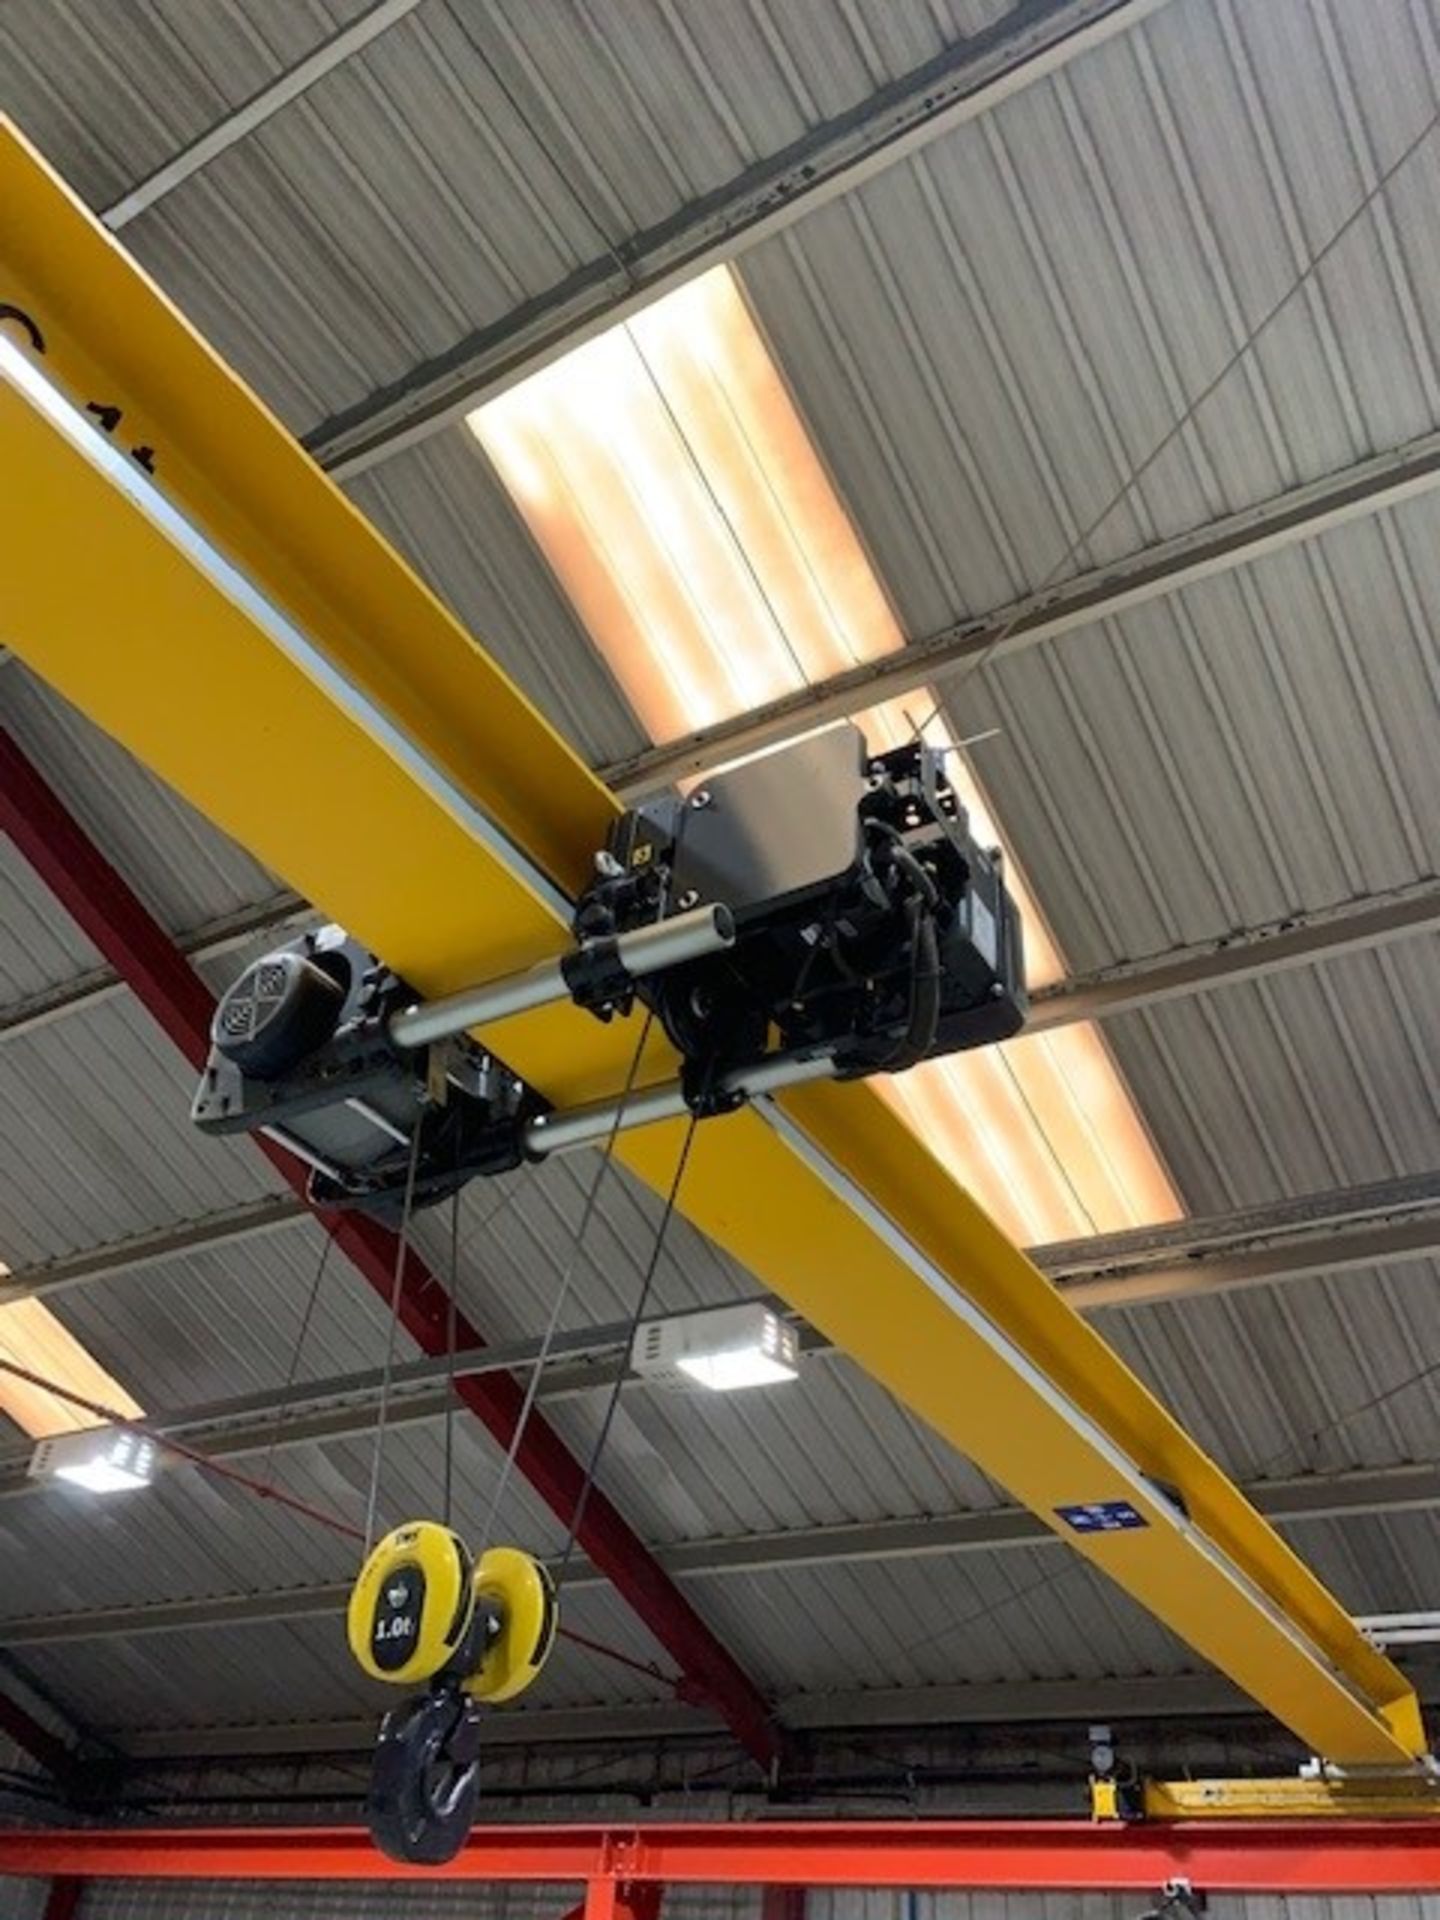 (2) Granada Model RC 1T 1 Tonne Remote Controlled Overhead Cranes (2017) 13m Span x 3.206m High on F - Image 14 of 18